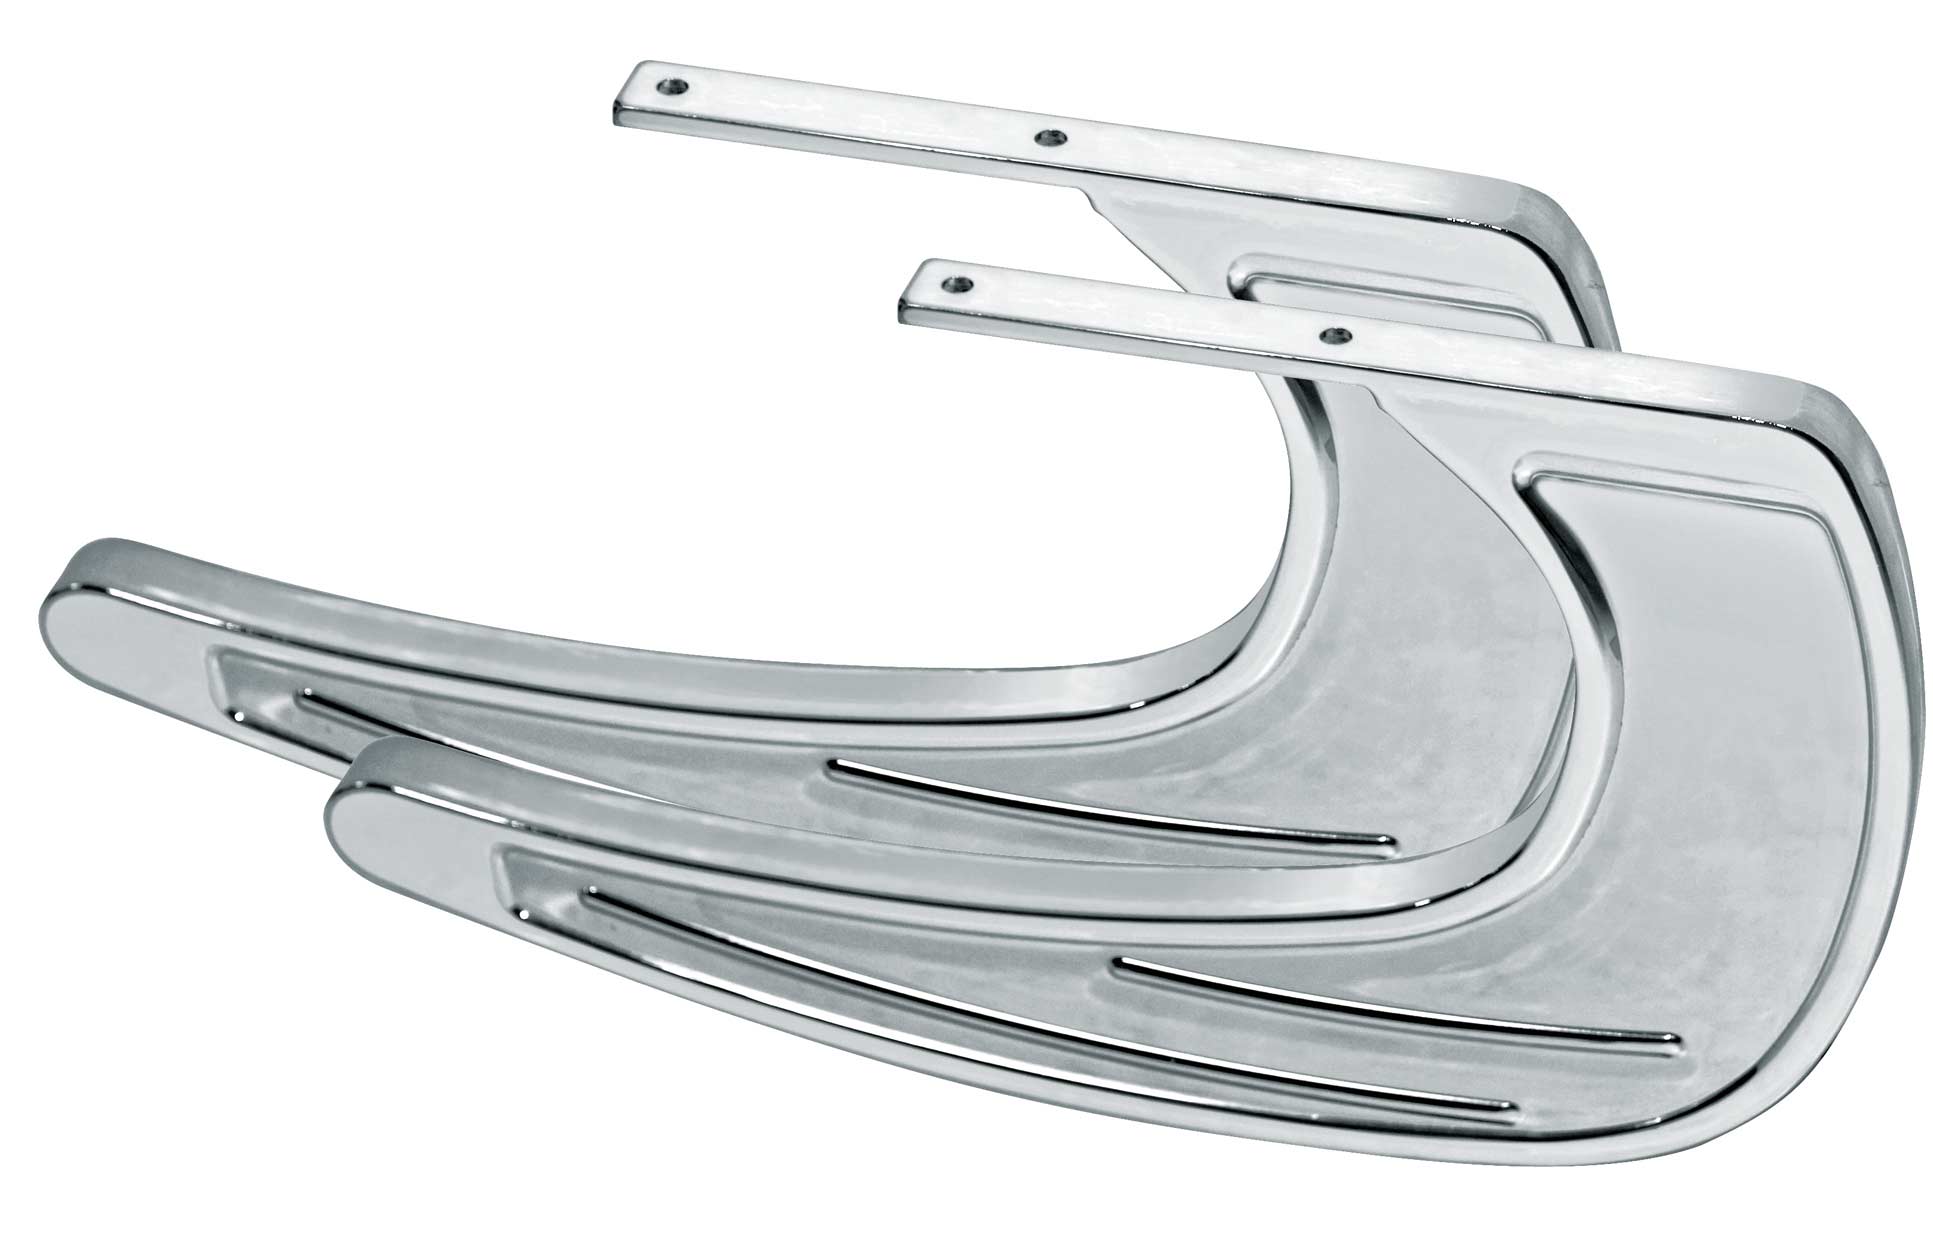 G349c Plated Iron